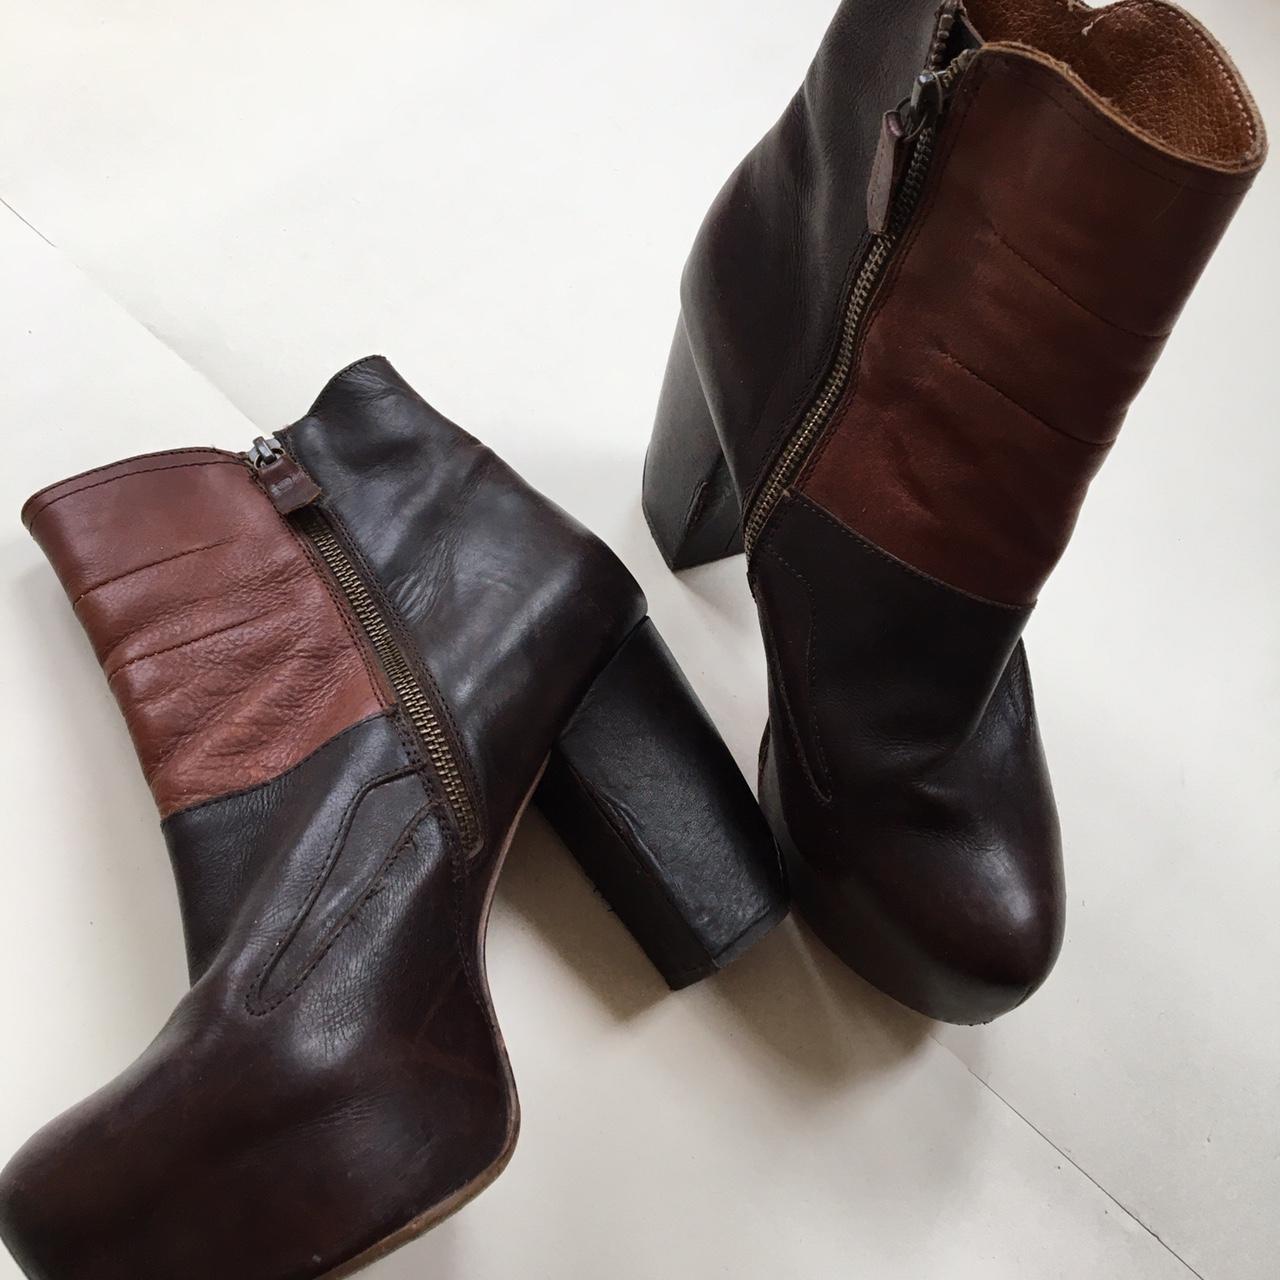 Women's Brown and Tan Boots | Depop